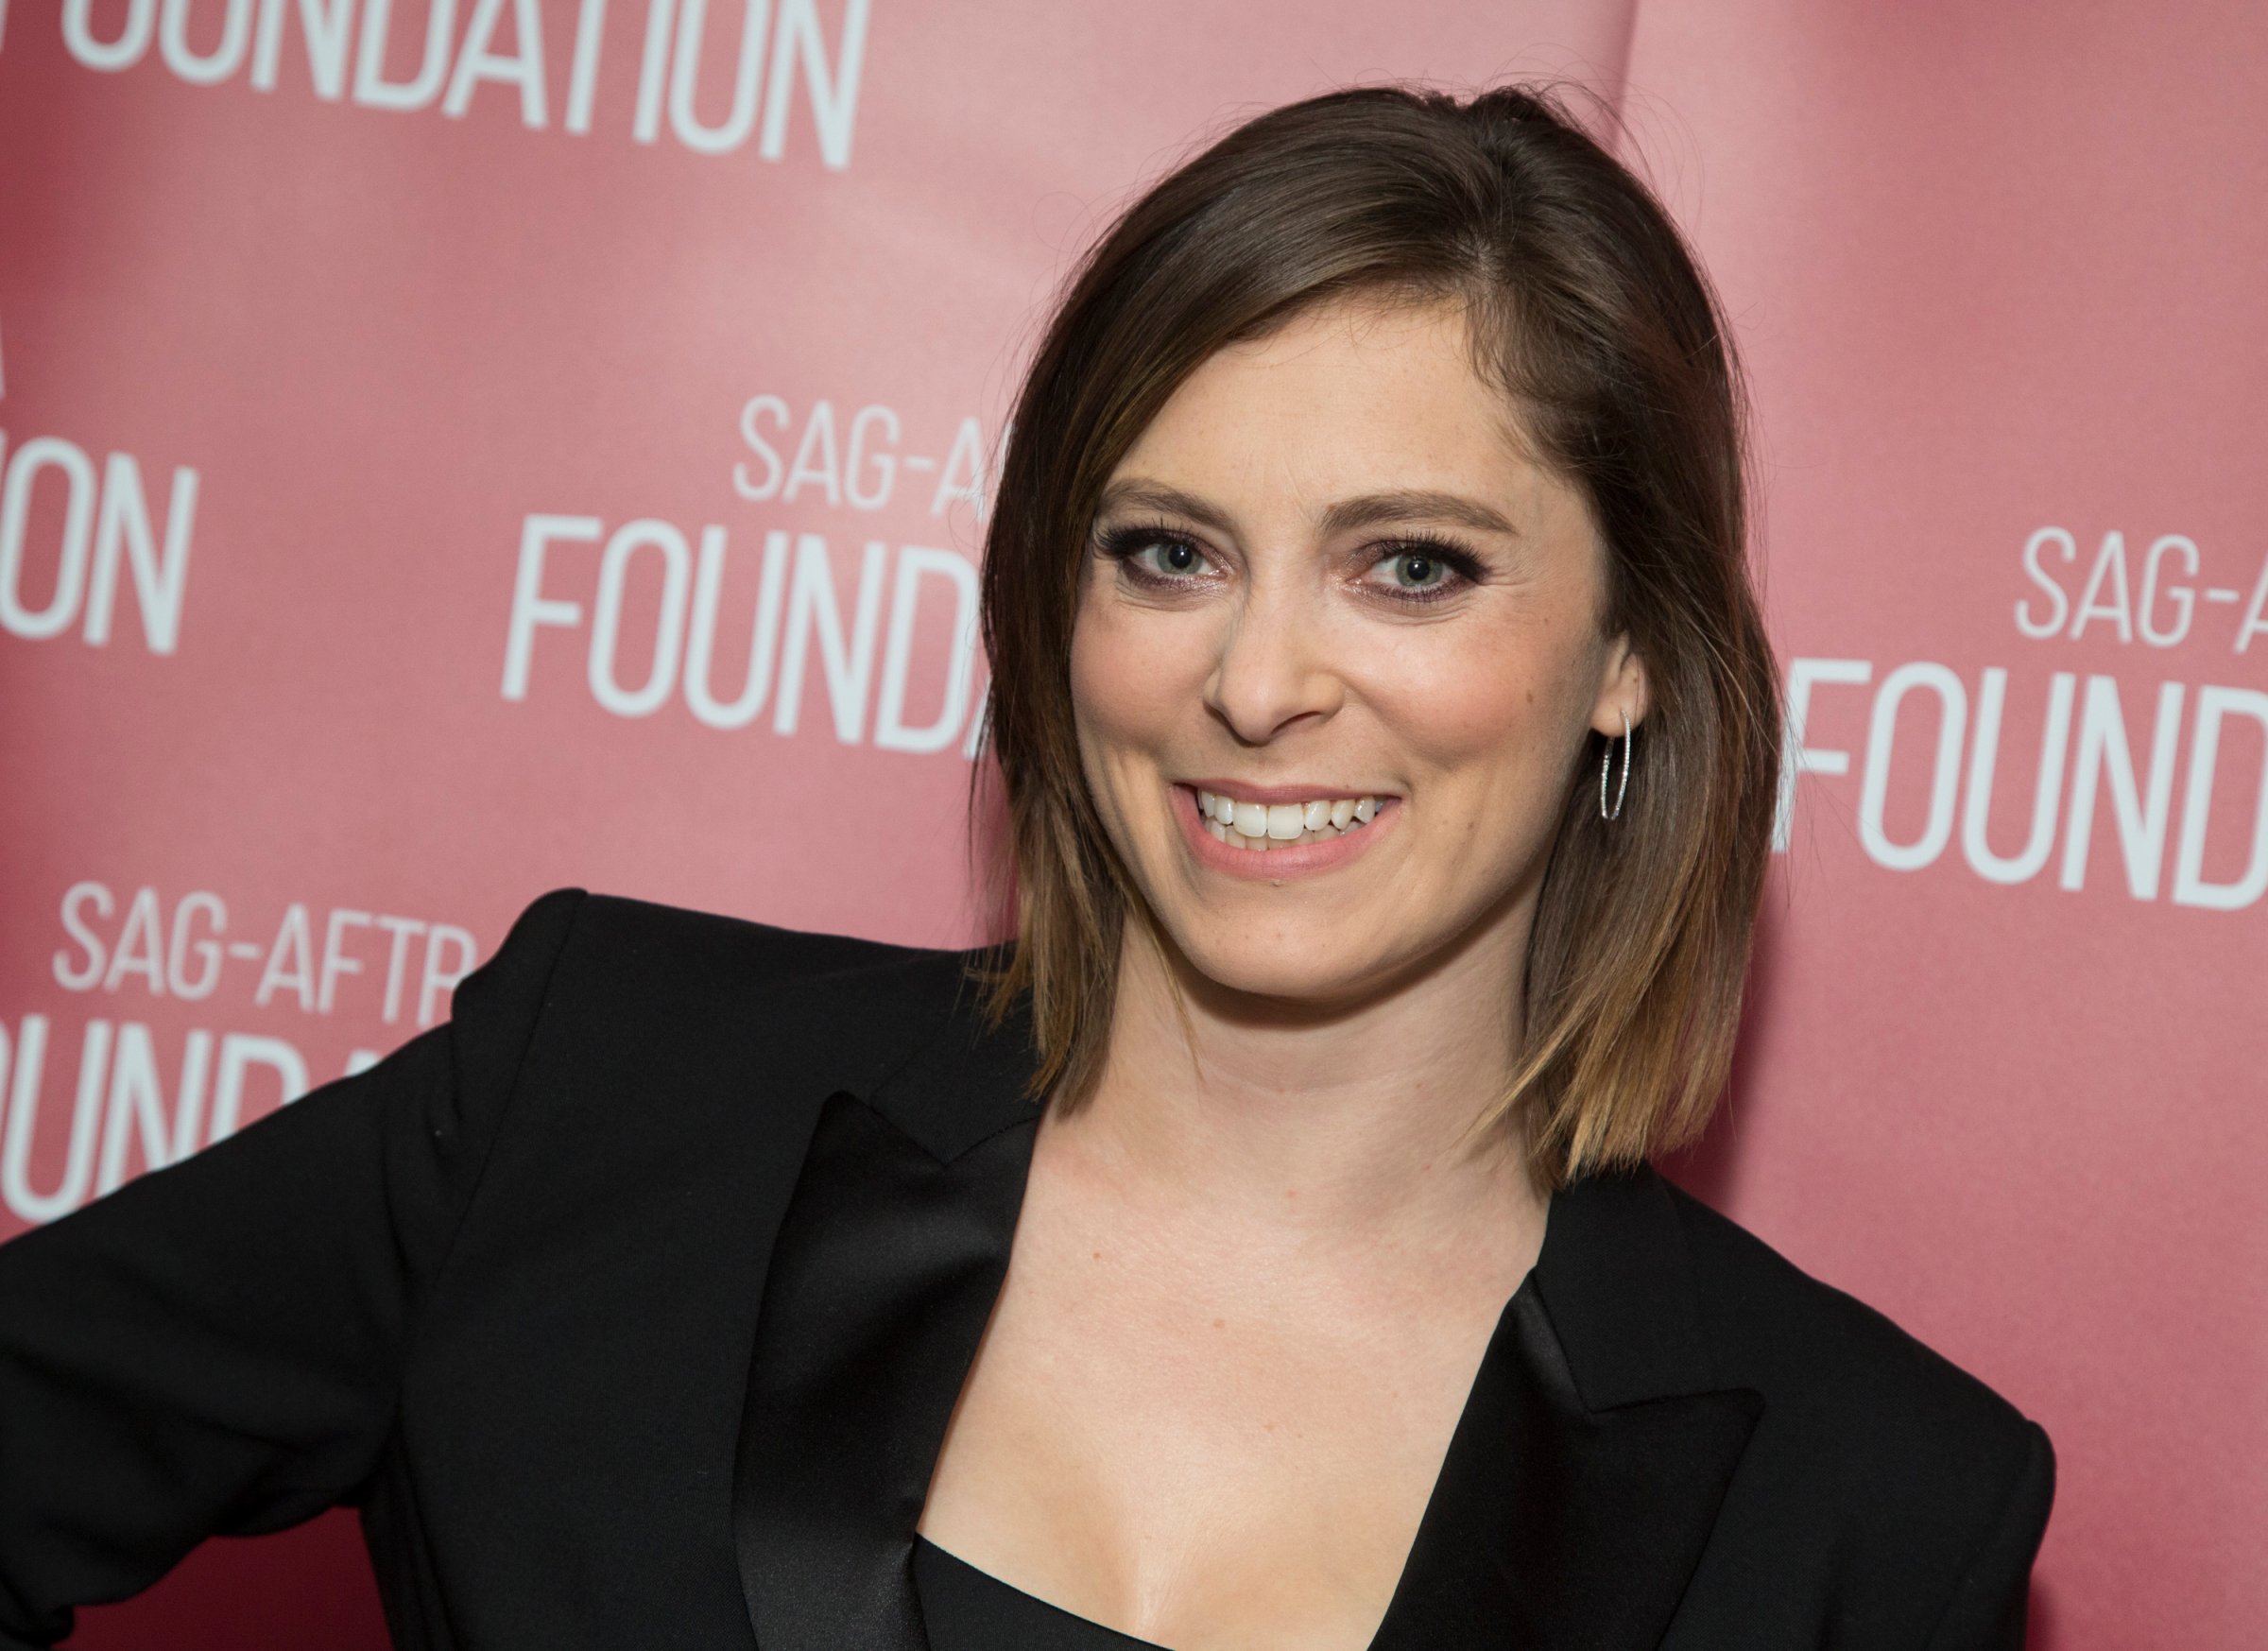 Actress Rachel Bloom attends SAG-AFTRA Foundation Conversations for "Crazy Ex-Girlfriend" at SAG-AFTRA Foundation on June 7, 2016 in Los Angeles, California.